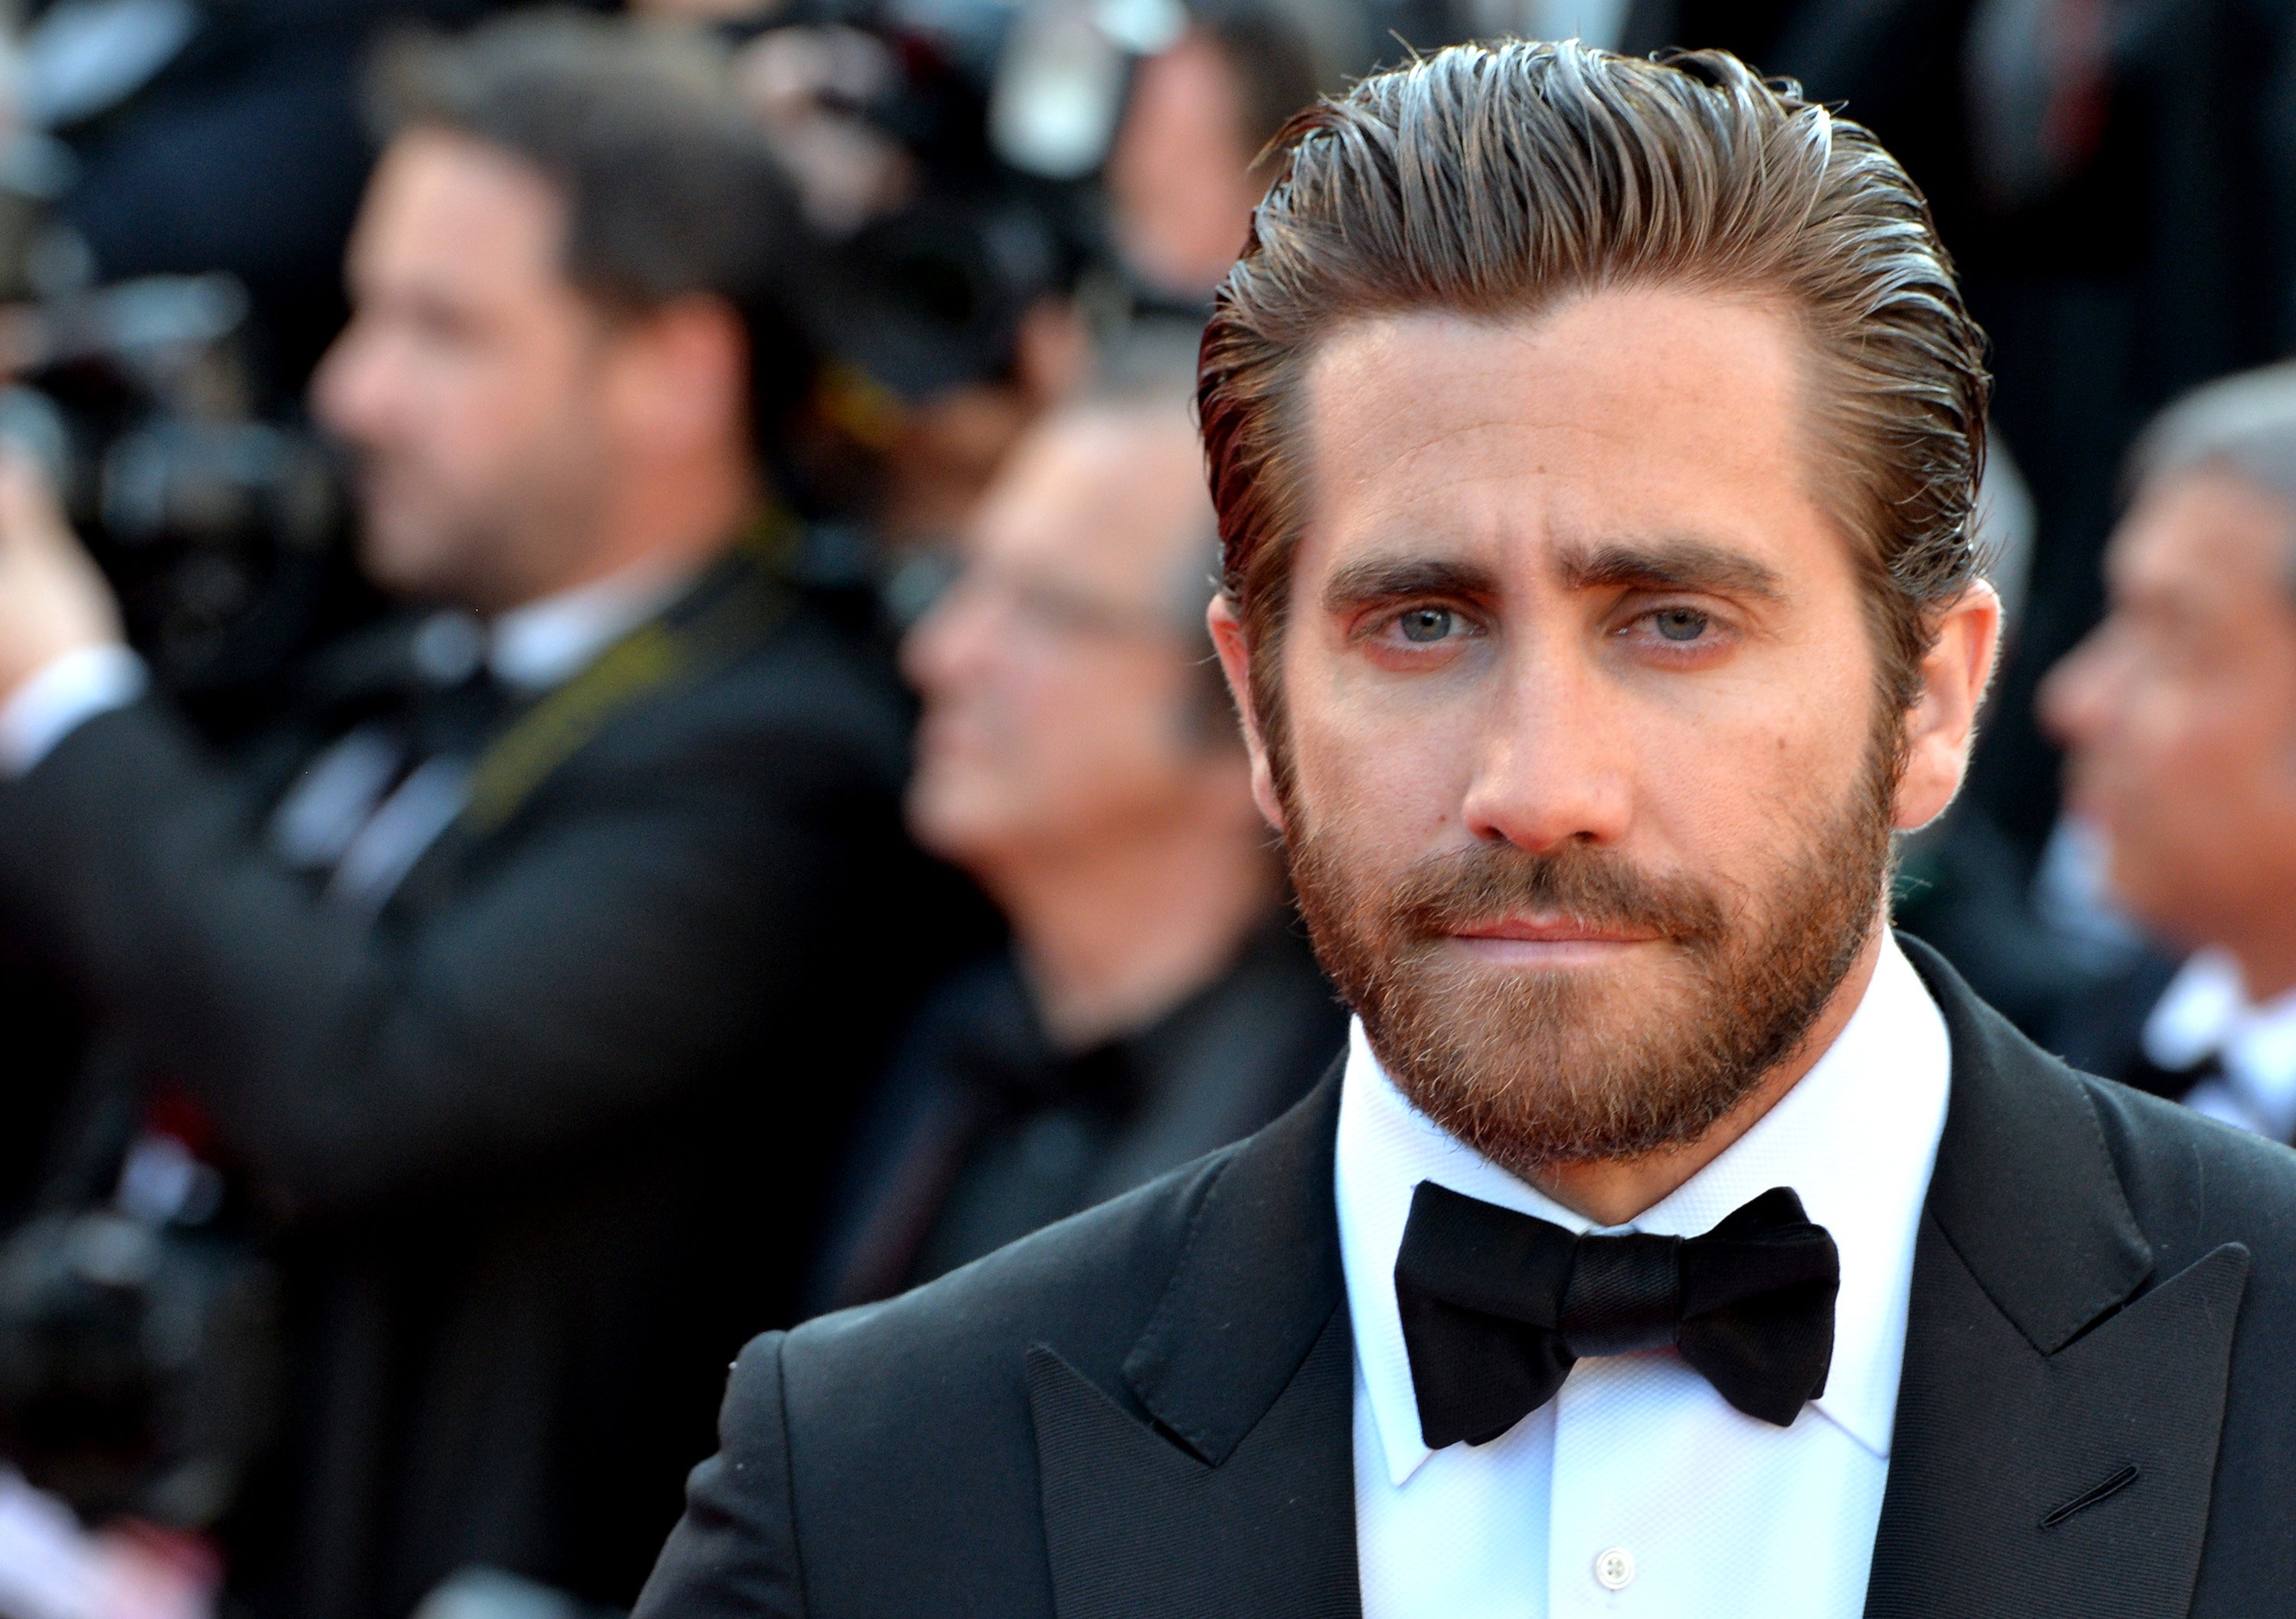 Jake Gyllenhaal, who almost had the rights to a Leonard Bernstein biopic, poses in a tuxedo